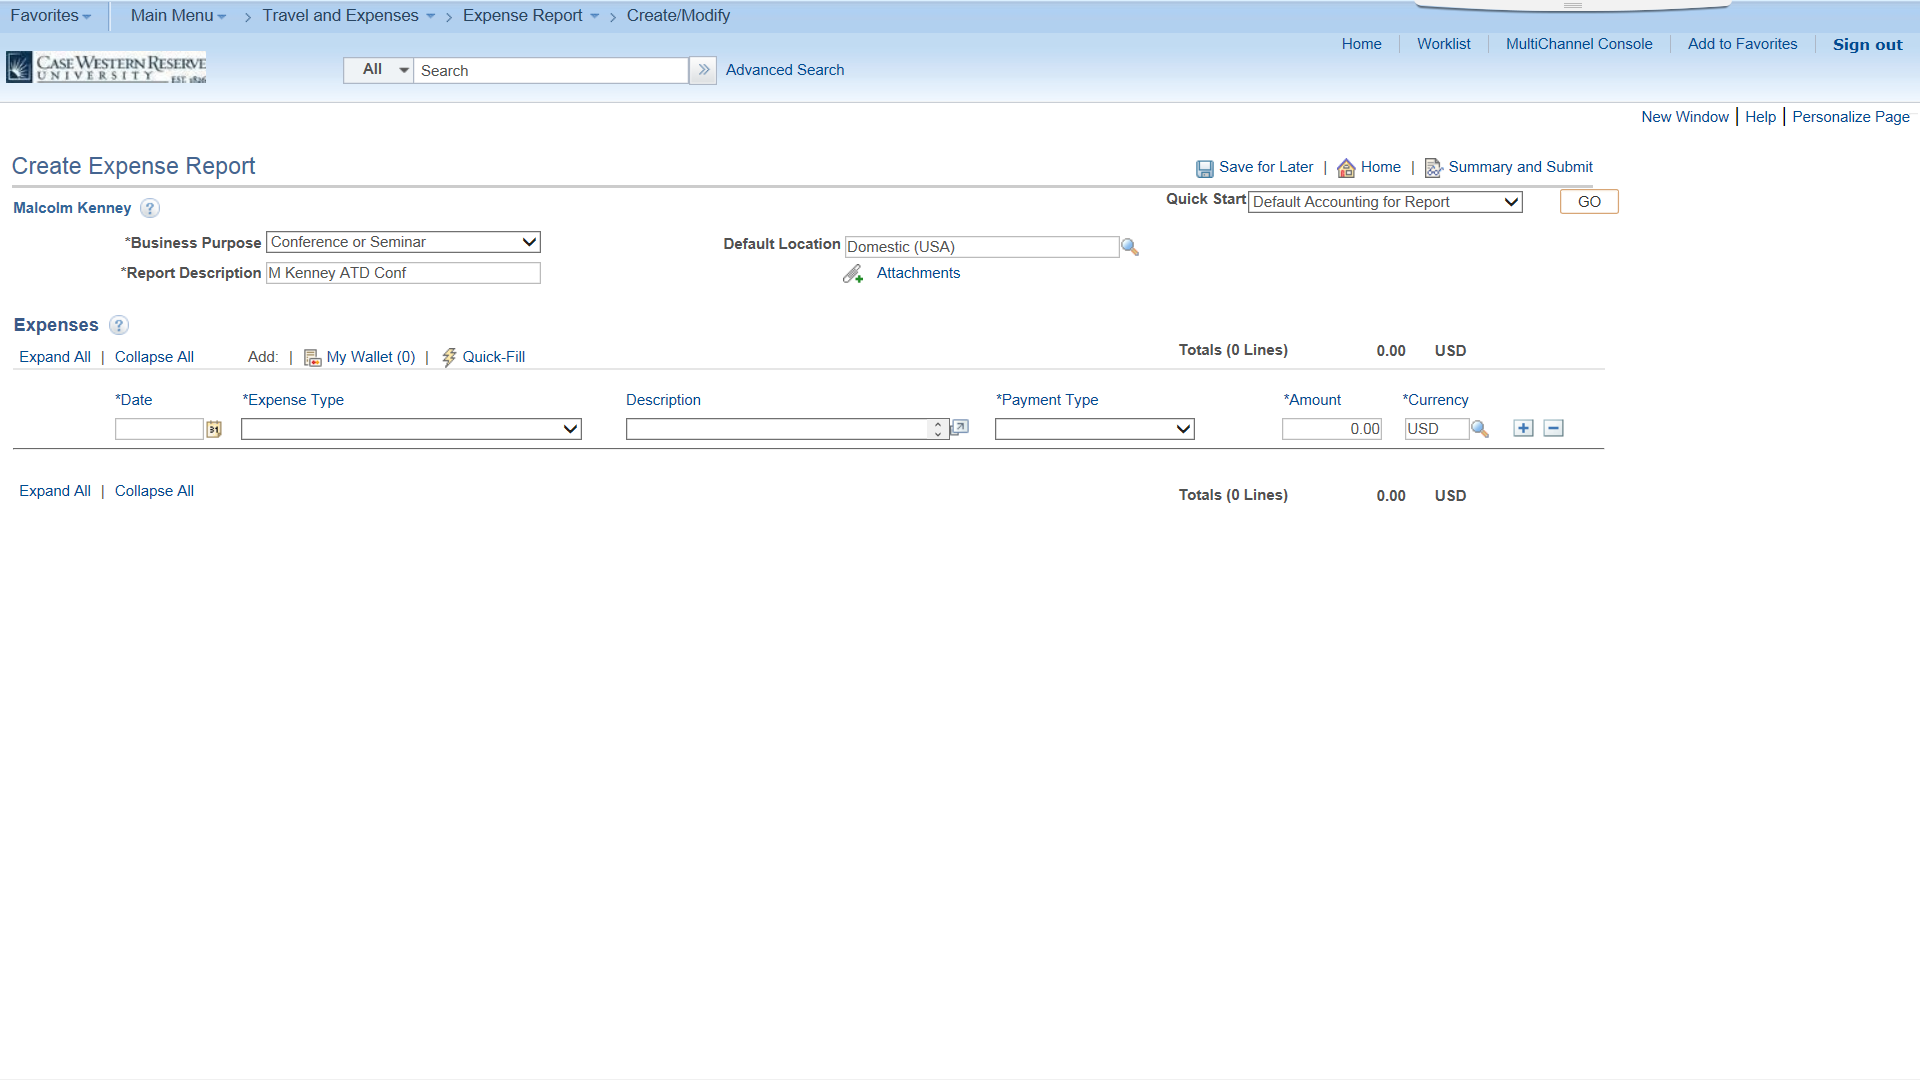 PeopleSoft Financials screen shot displaying Create Expense Report form